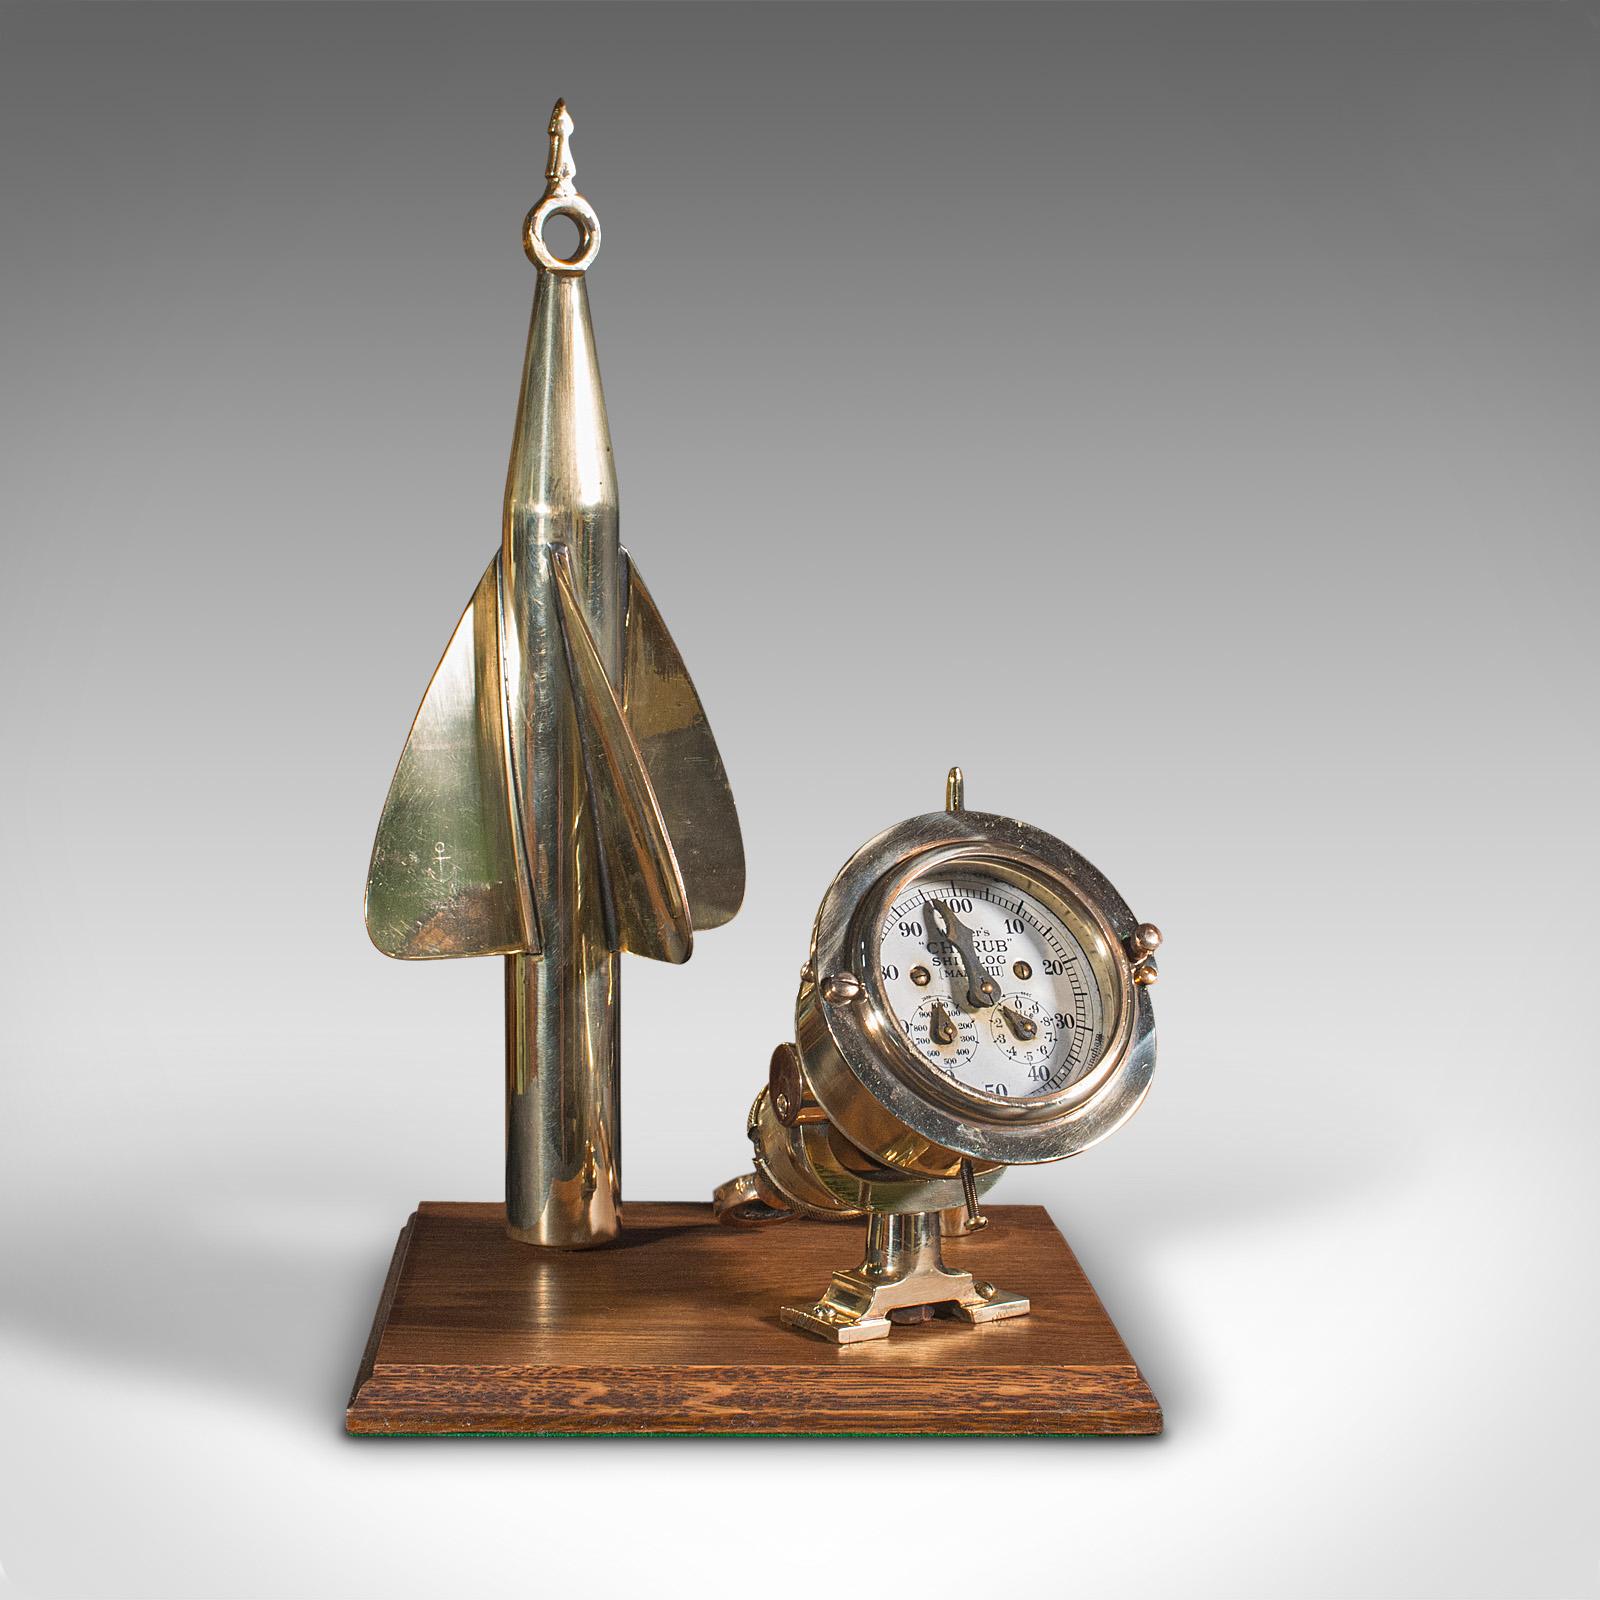 This is a vintage ship's log desk ornament. An English, brass and oak maritime display instrument, dating to the early 20th century, circa 1930.

Dashing nautical interest, presented for display
Displays a desirable aged patina and in good